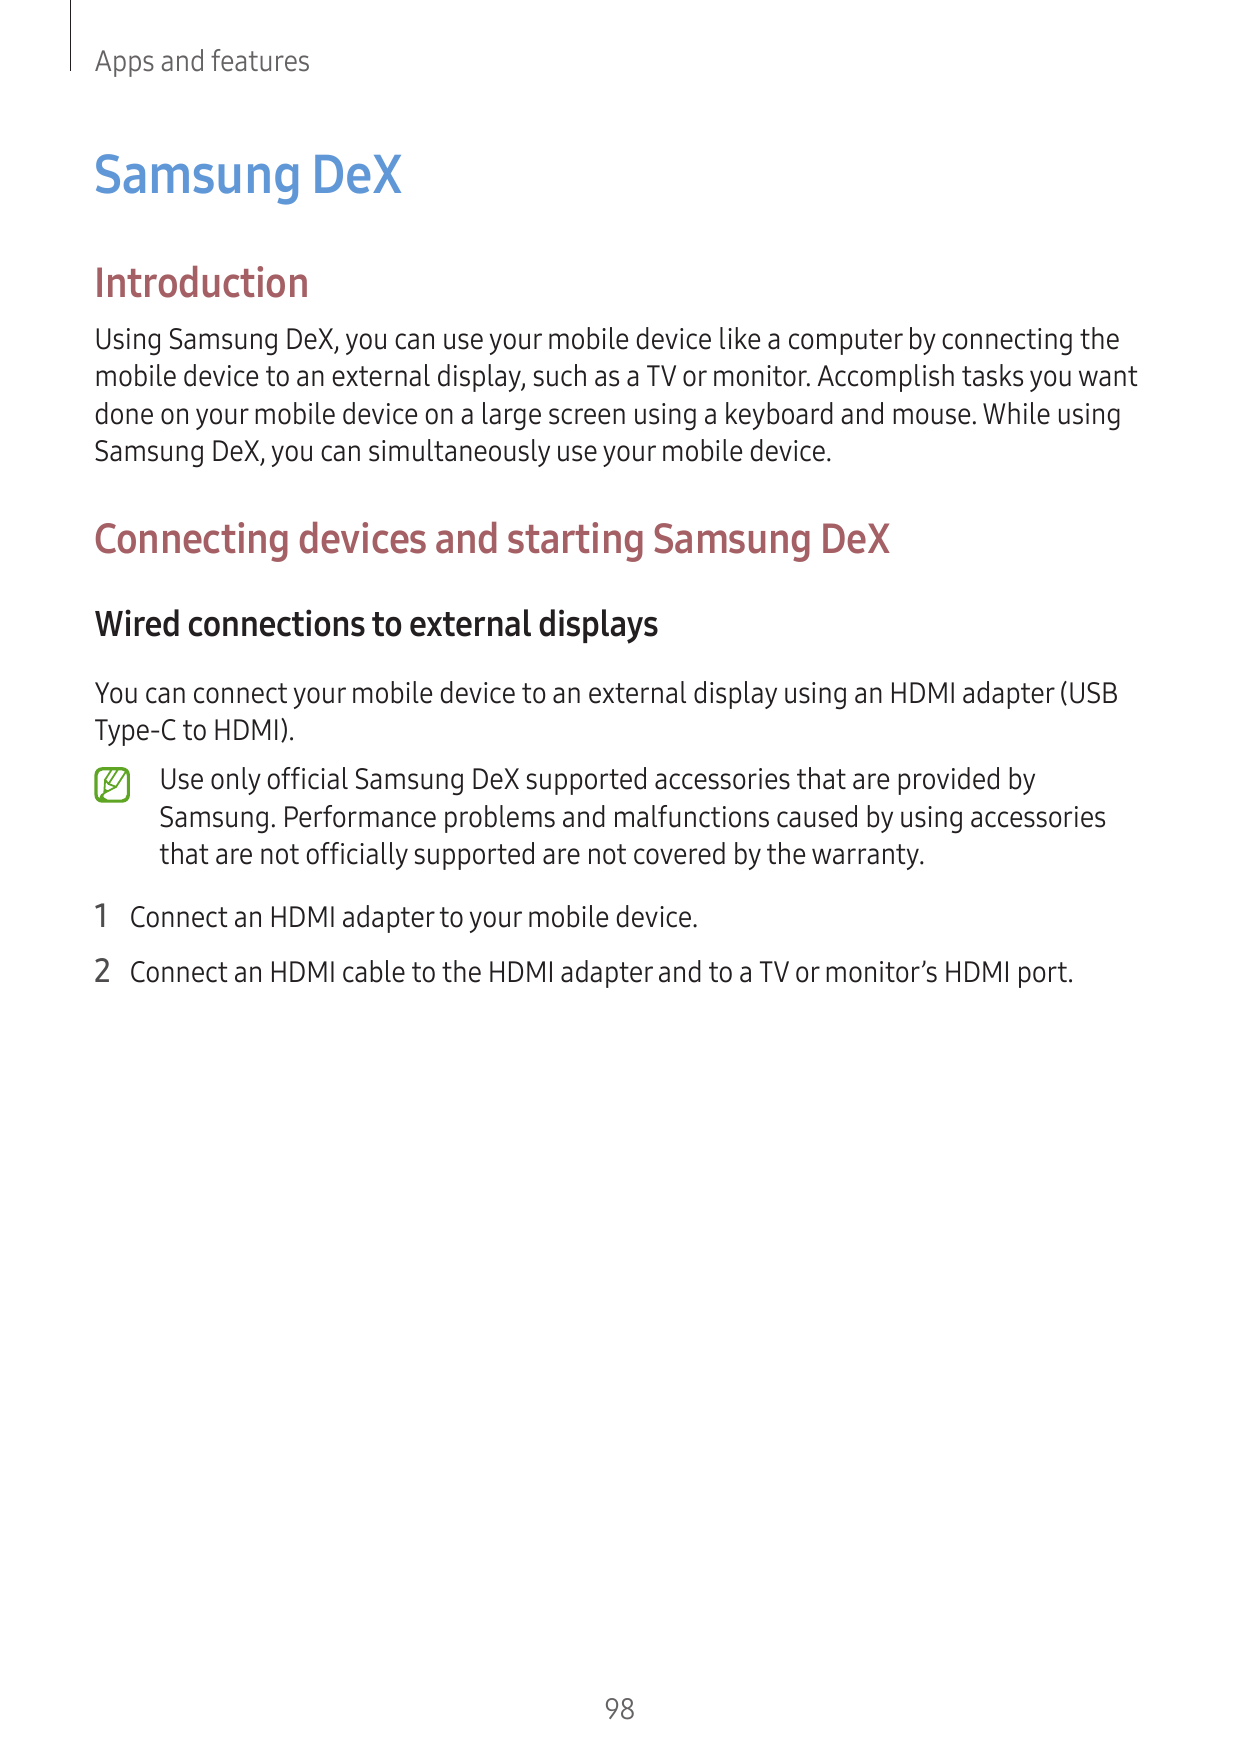 Apps and featuresSamsung DeXIntroductionUsing Samsung DeX, you can use your mobile device like a computer by connecting themobil